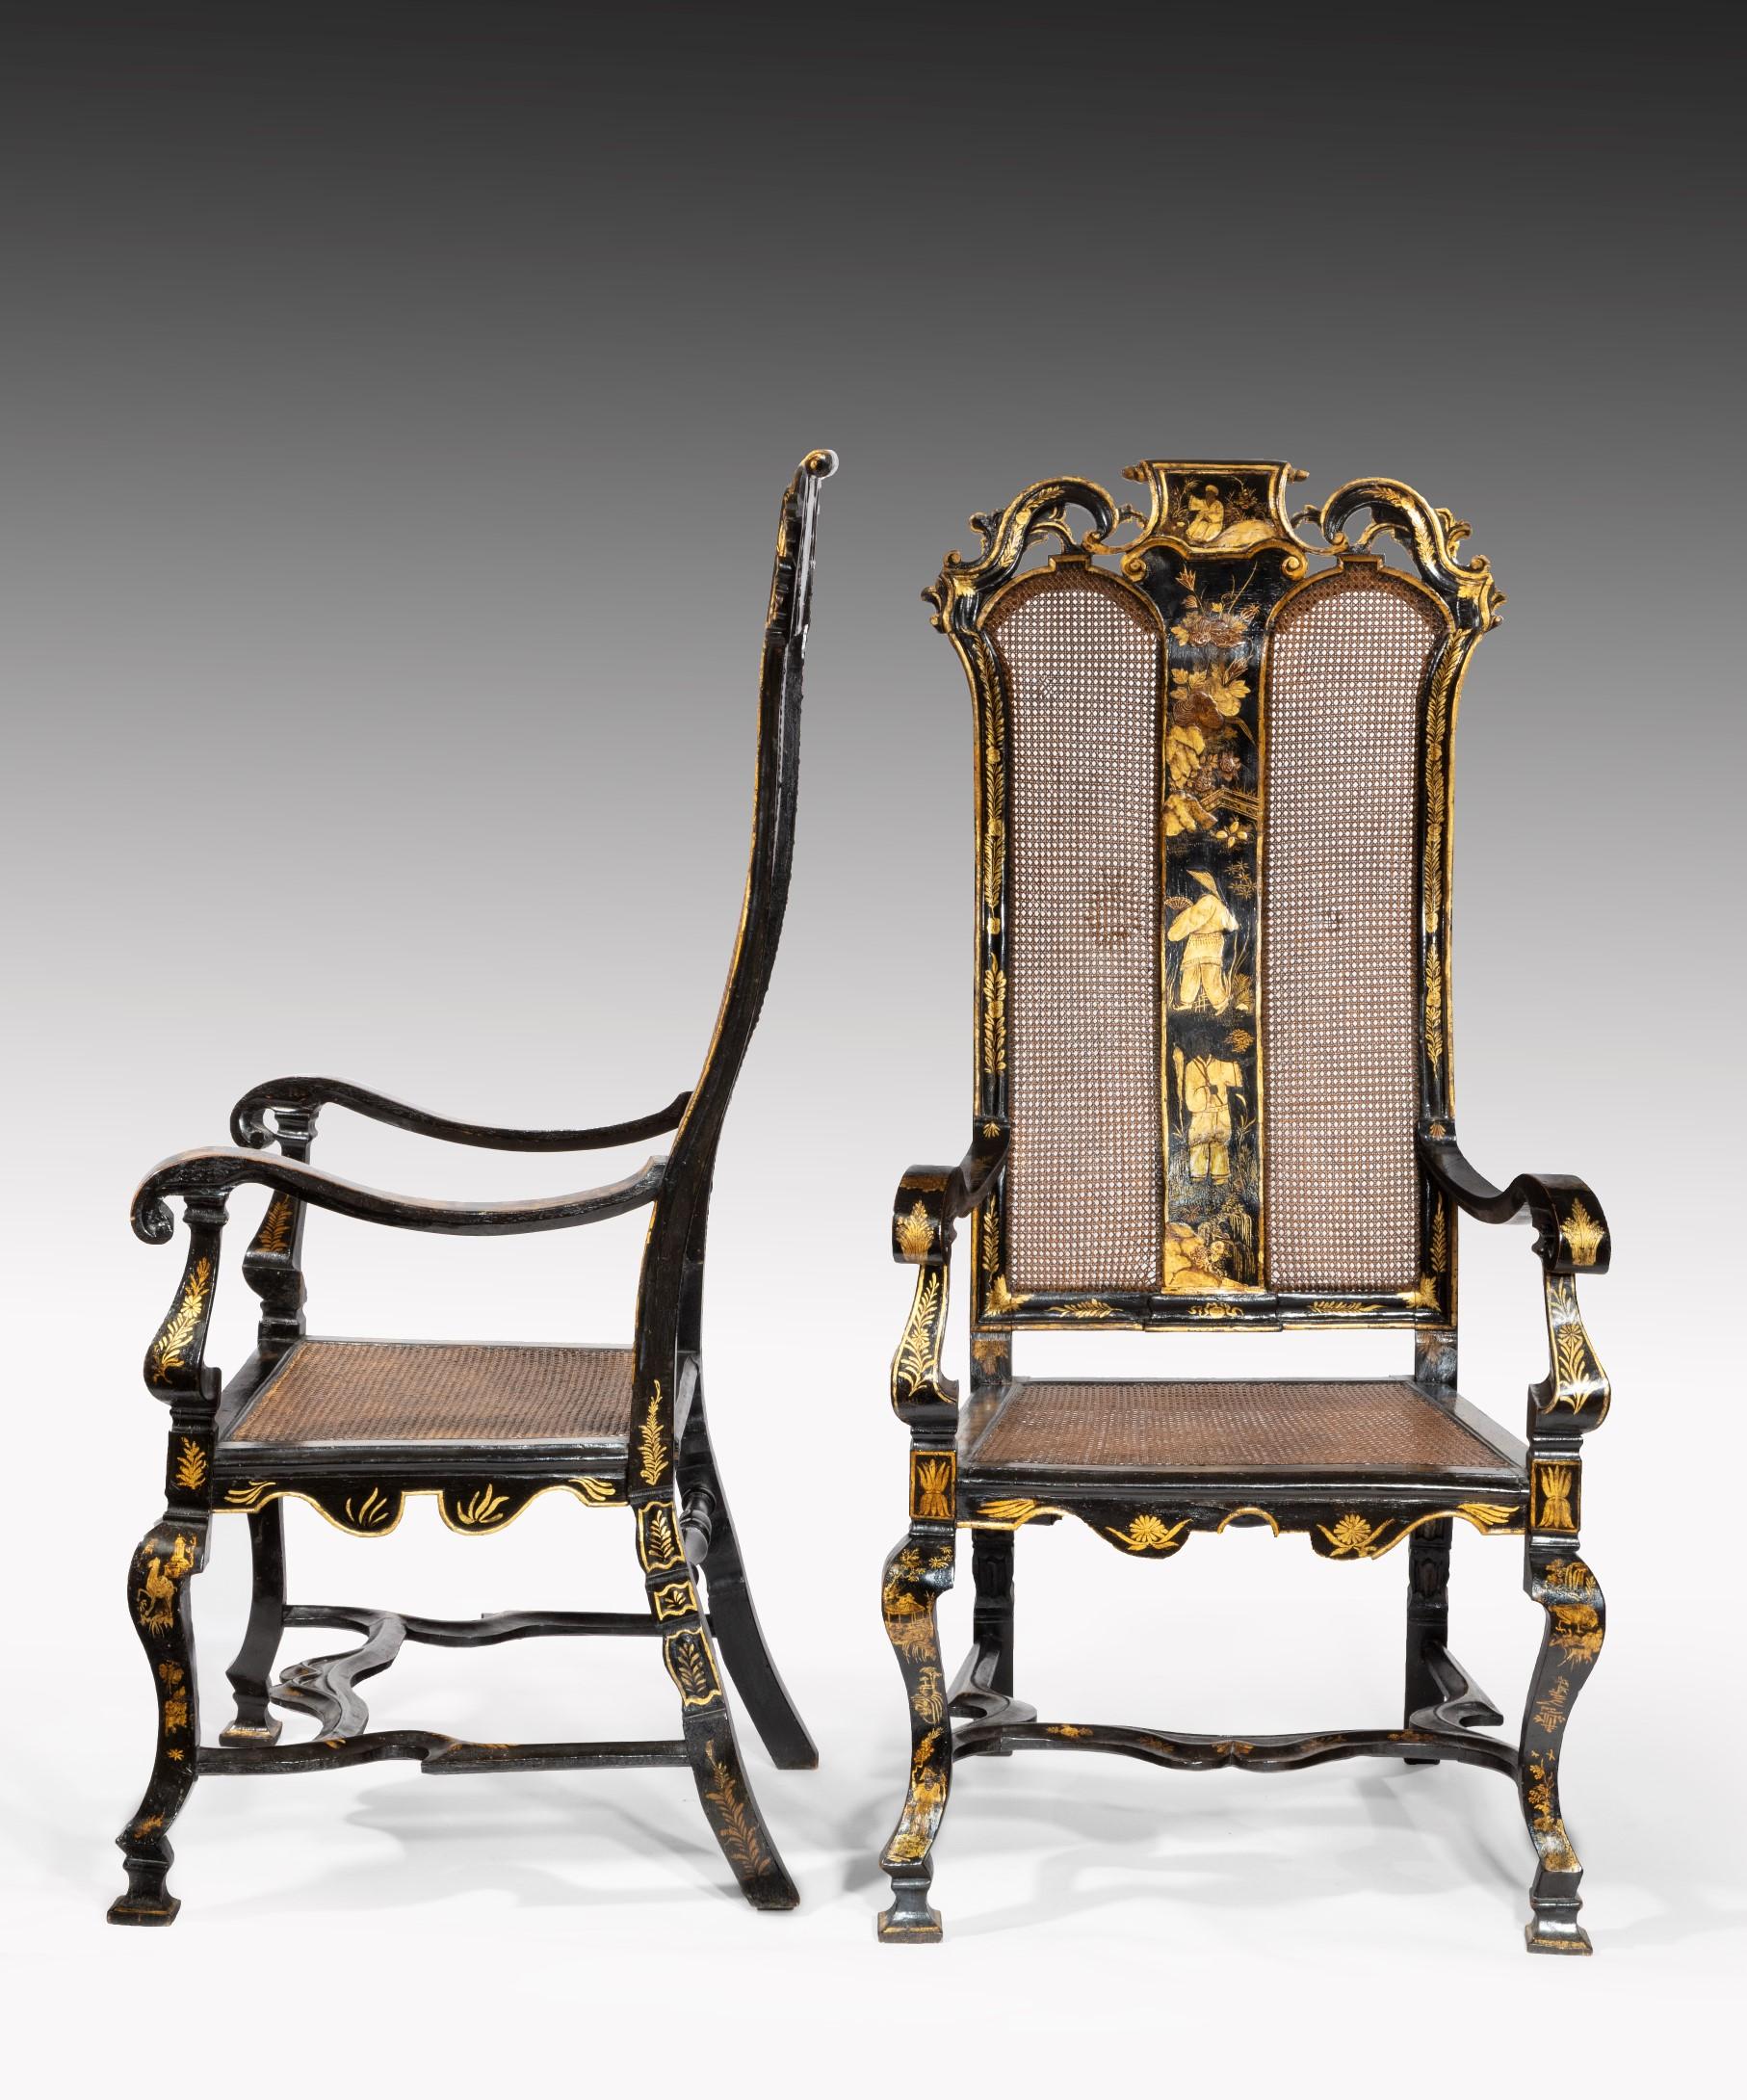 An exceptional pair of William III period japanned and lacquered armchairs; the armchairs' high back with a carved and pierced cresting rail above a lacquered central splat flanked by panels of caning; having elegantly curved arms above a caned seat